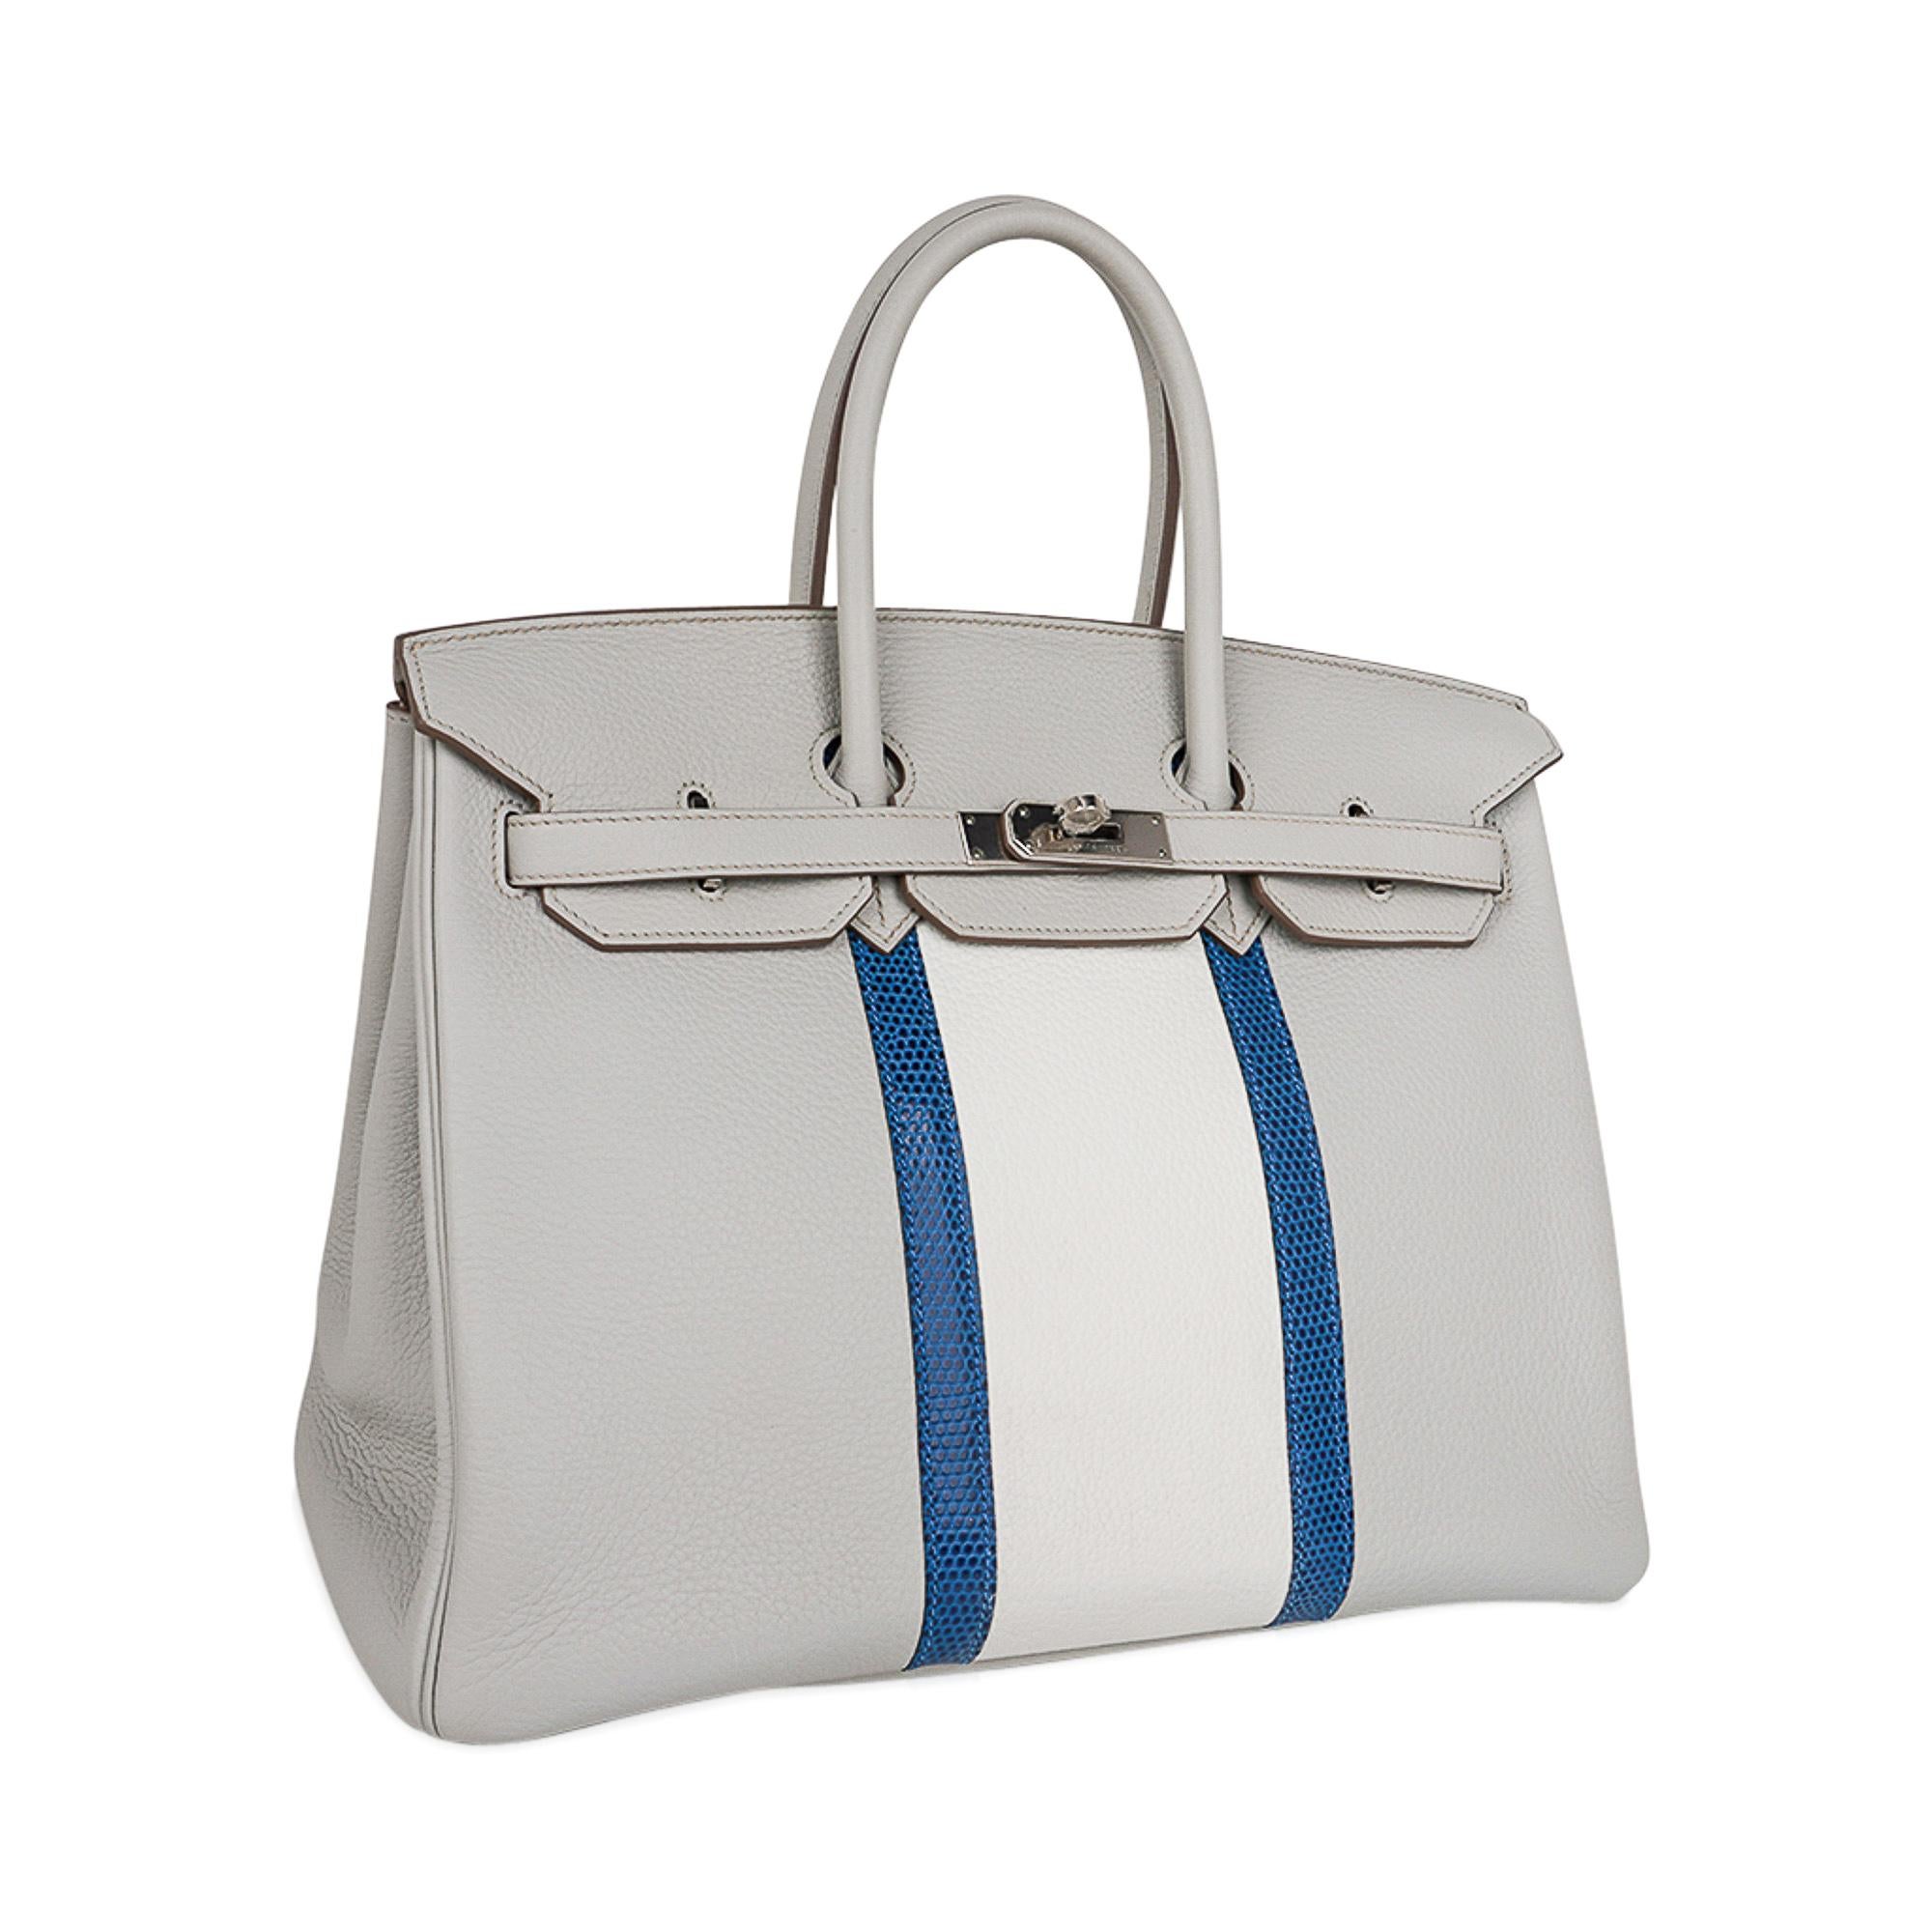 Mightychic offers a very rare limited edition Hermes Birkin 35 Club bag featured in Gris Perle.
Exquisite Gris Perle and white Clemence leather is accentuated with rich blue Mykonos Lizard.
Palladium Hardware.
Comes with sleepers, lock, keys and